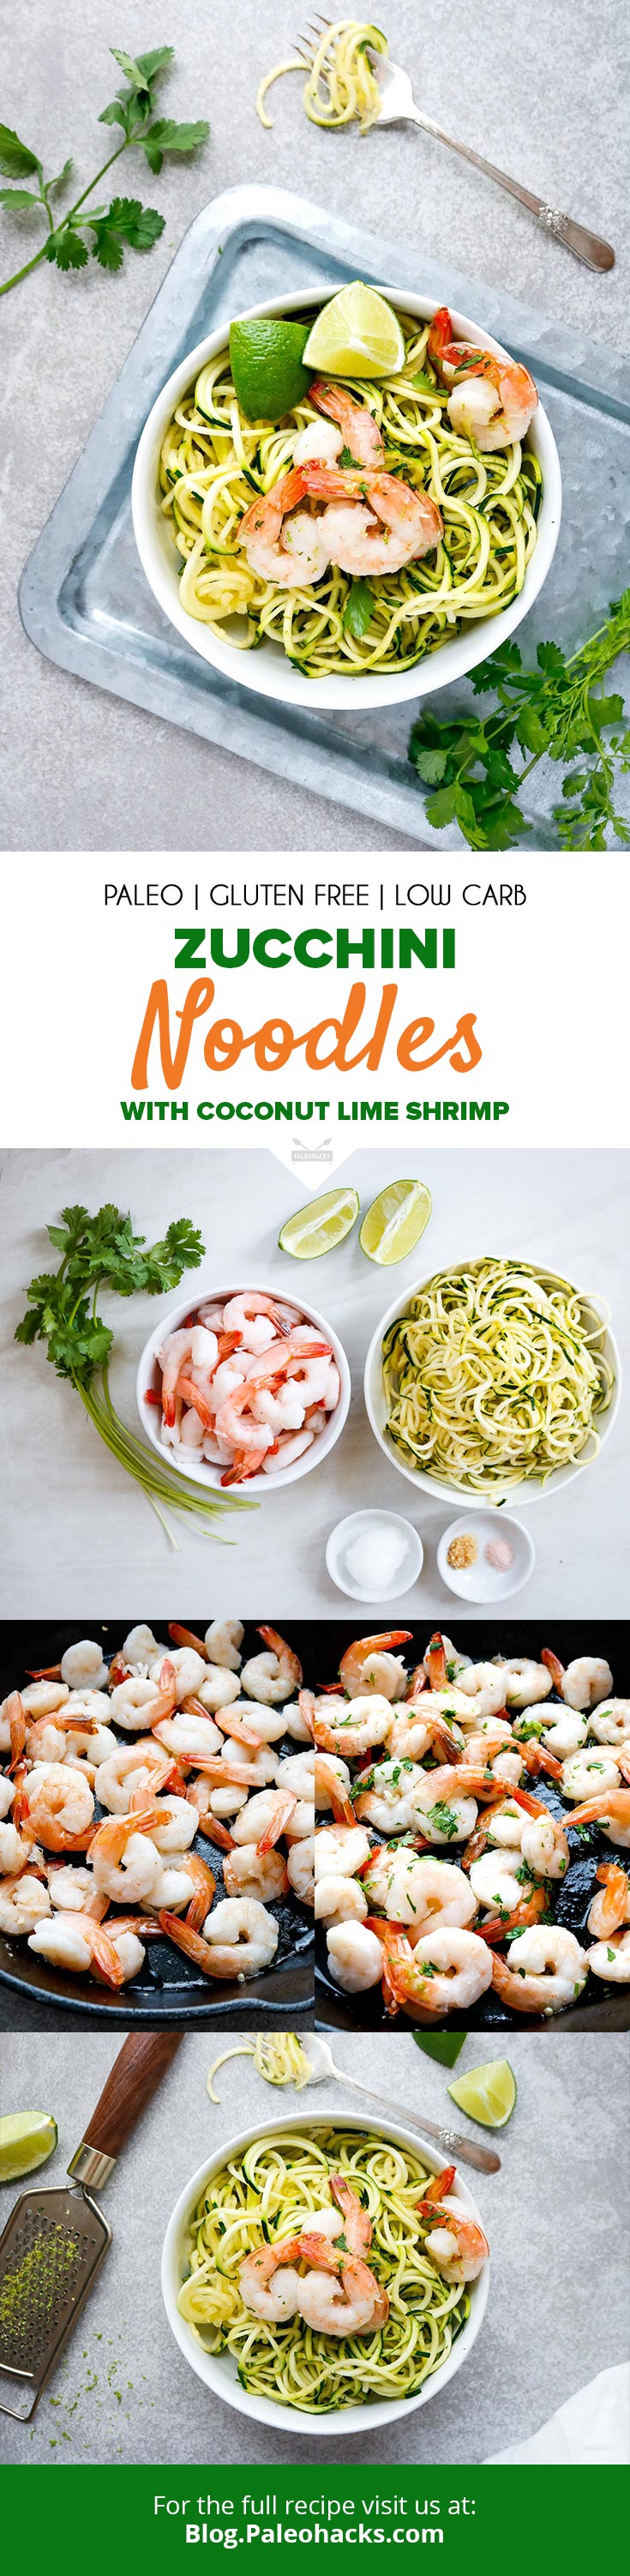 Add a refreshing twist to your pasta salad with chilled Zucchini Noodles and Coconut Lime Shrimp. It's a gluten-free answer to the pasta you crave!